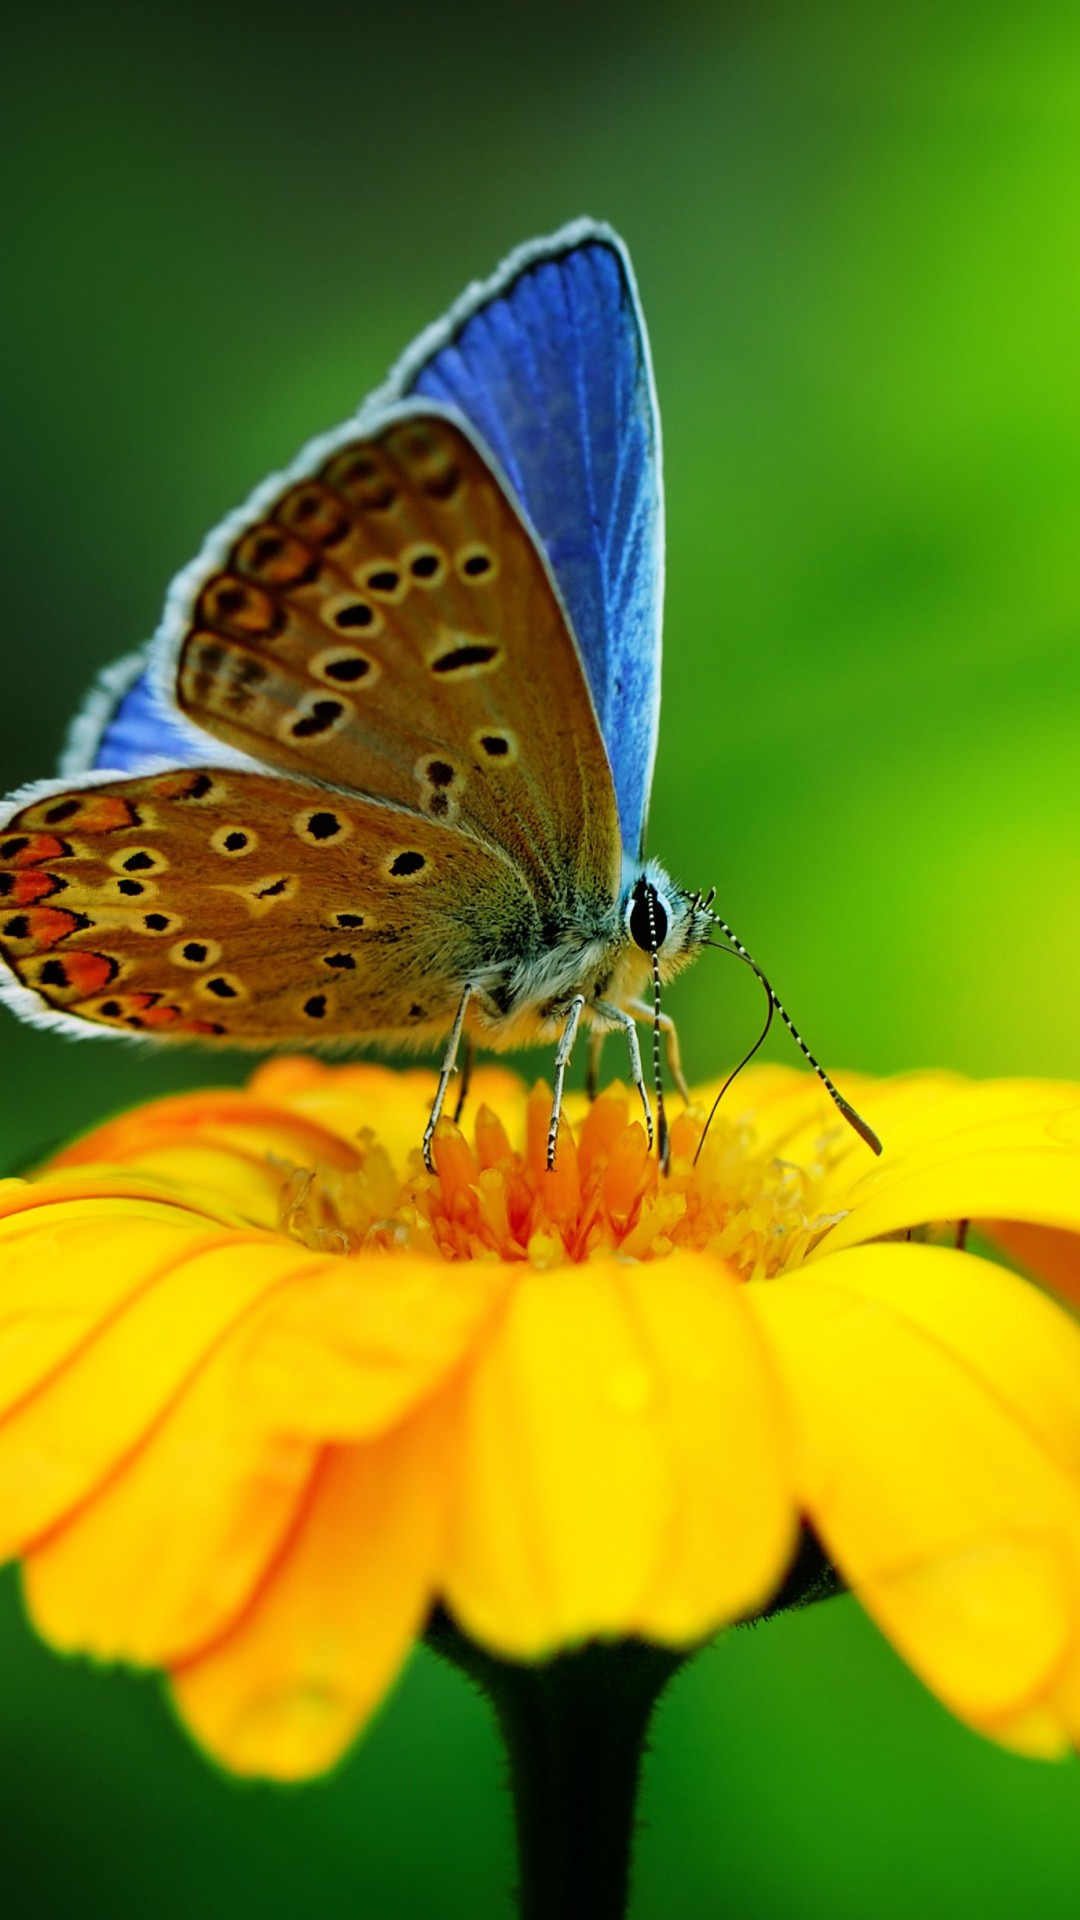 Butterfly Collecting Pollen Wallpaper for SAMSUNG Galaxy Note 3